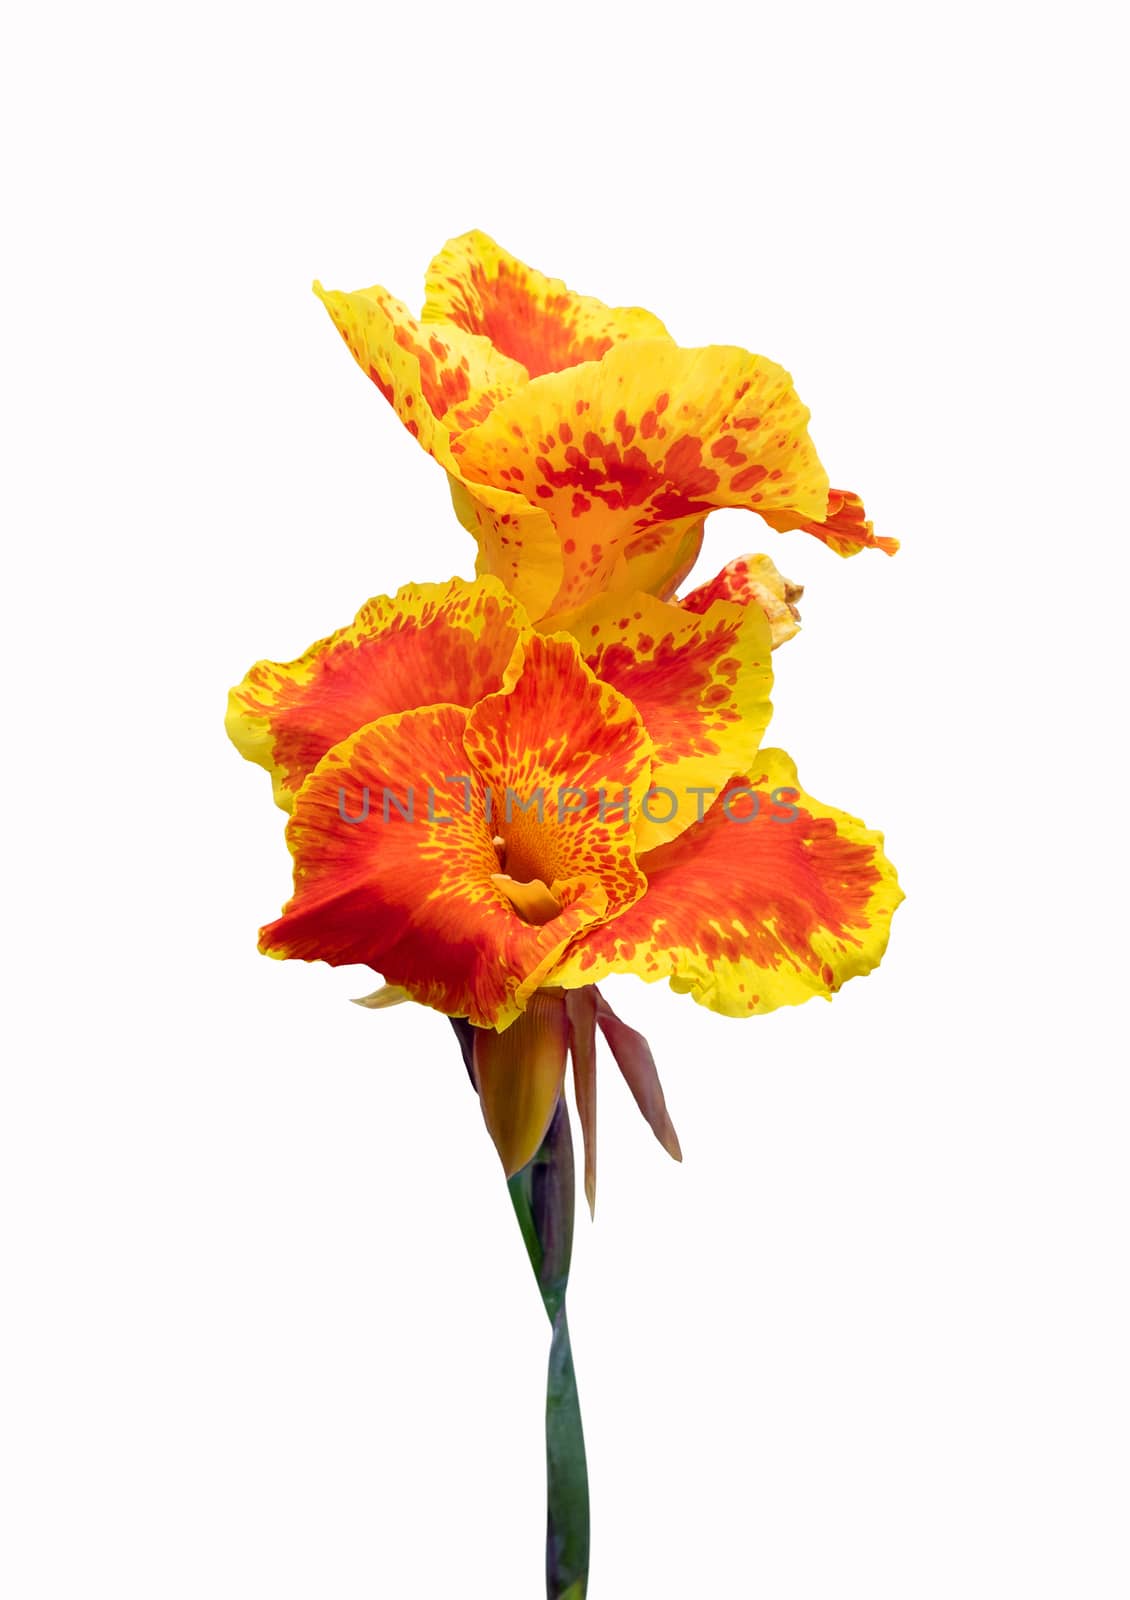 Orange and yellow Canna lily flower by pkproject